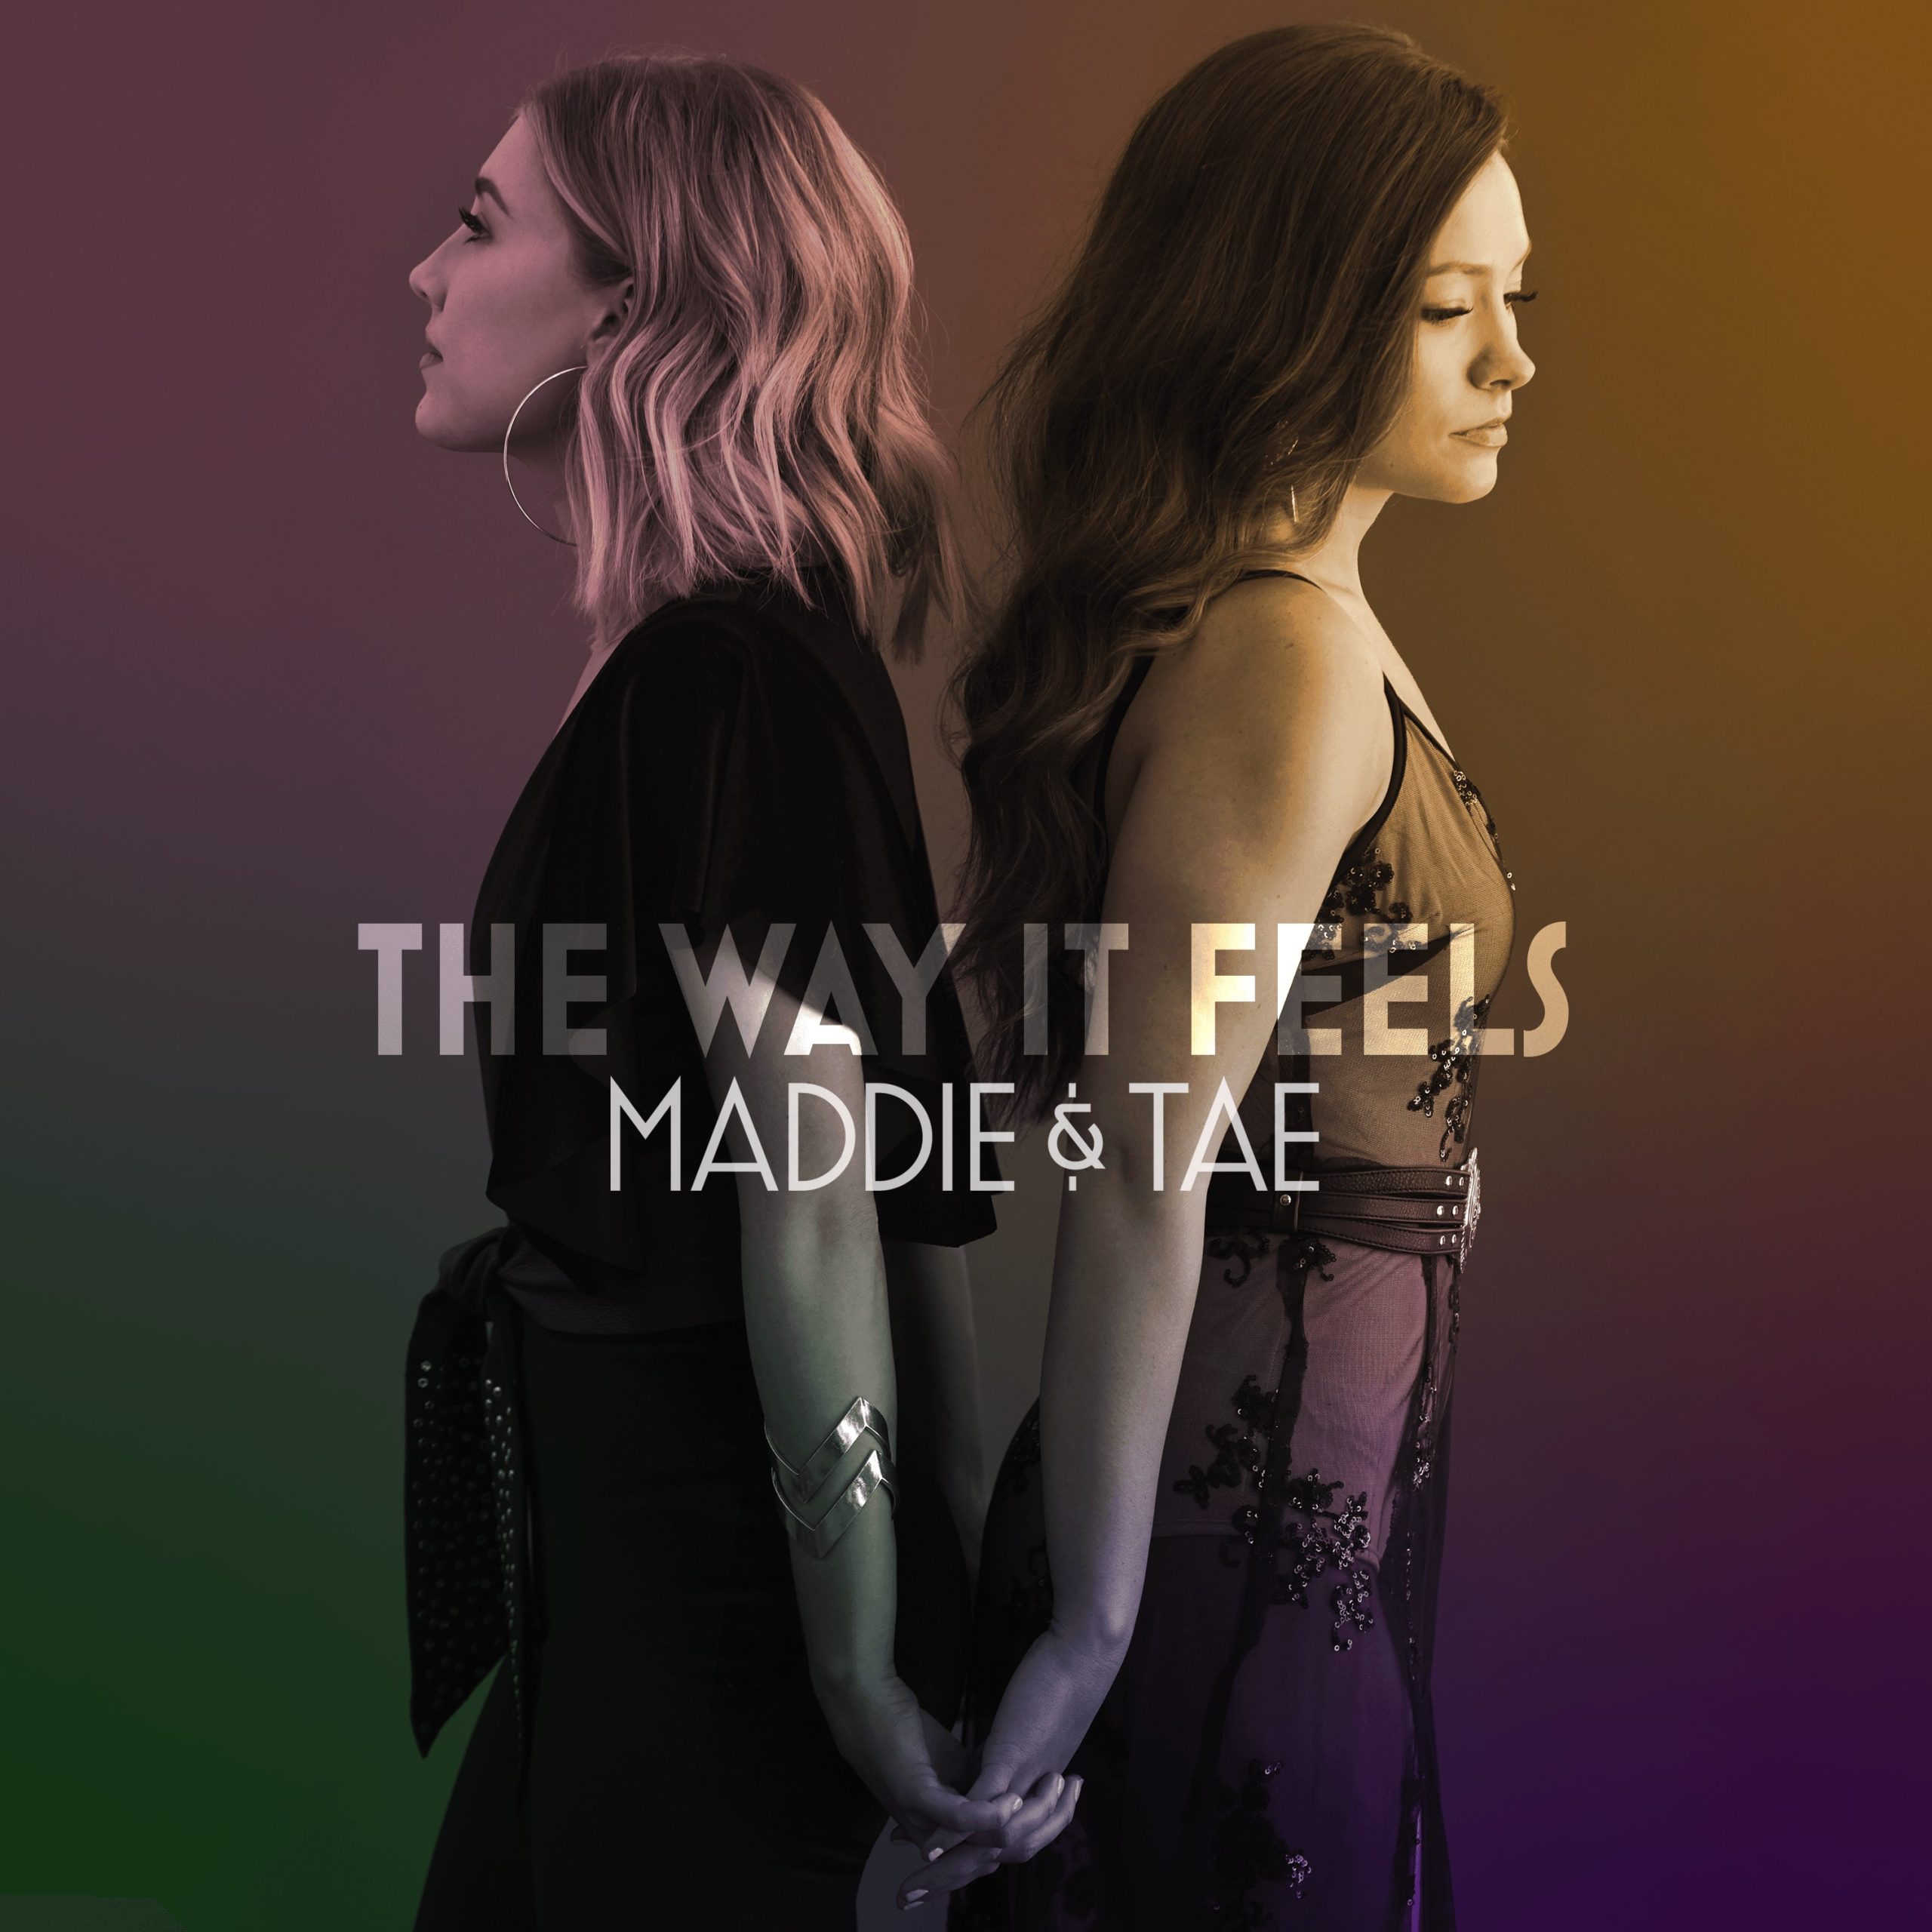 Maddie & Tae 'The Way It Feels' Available Now! Maddie & Tae